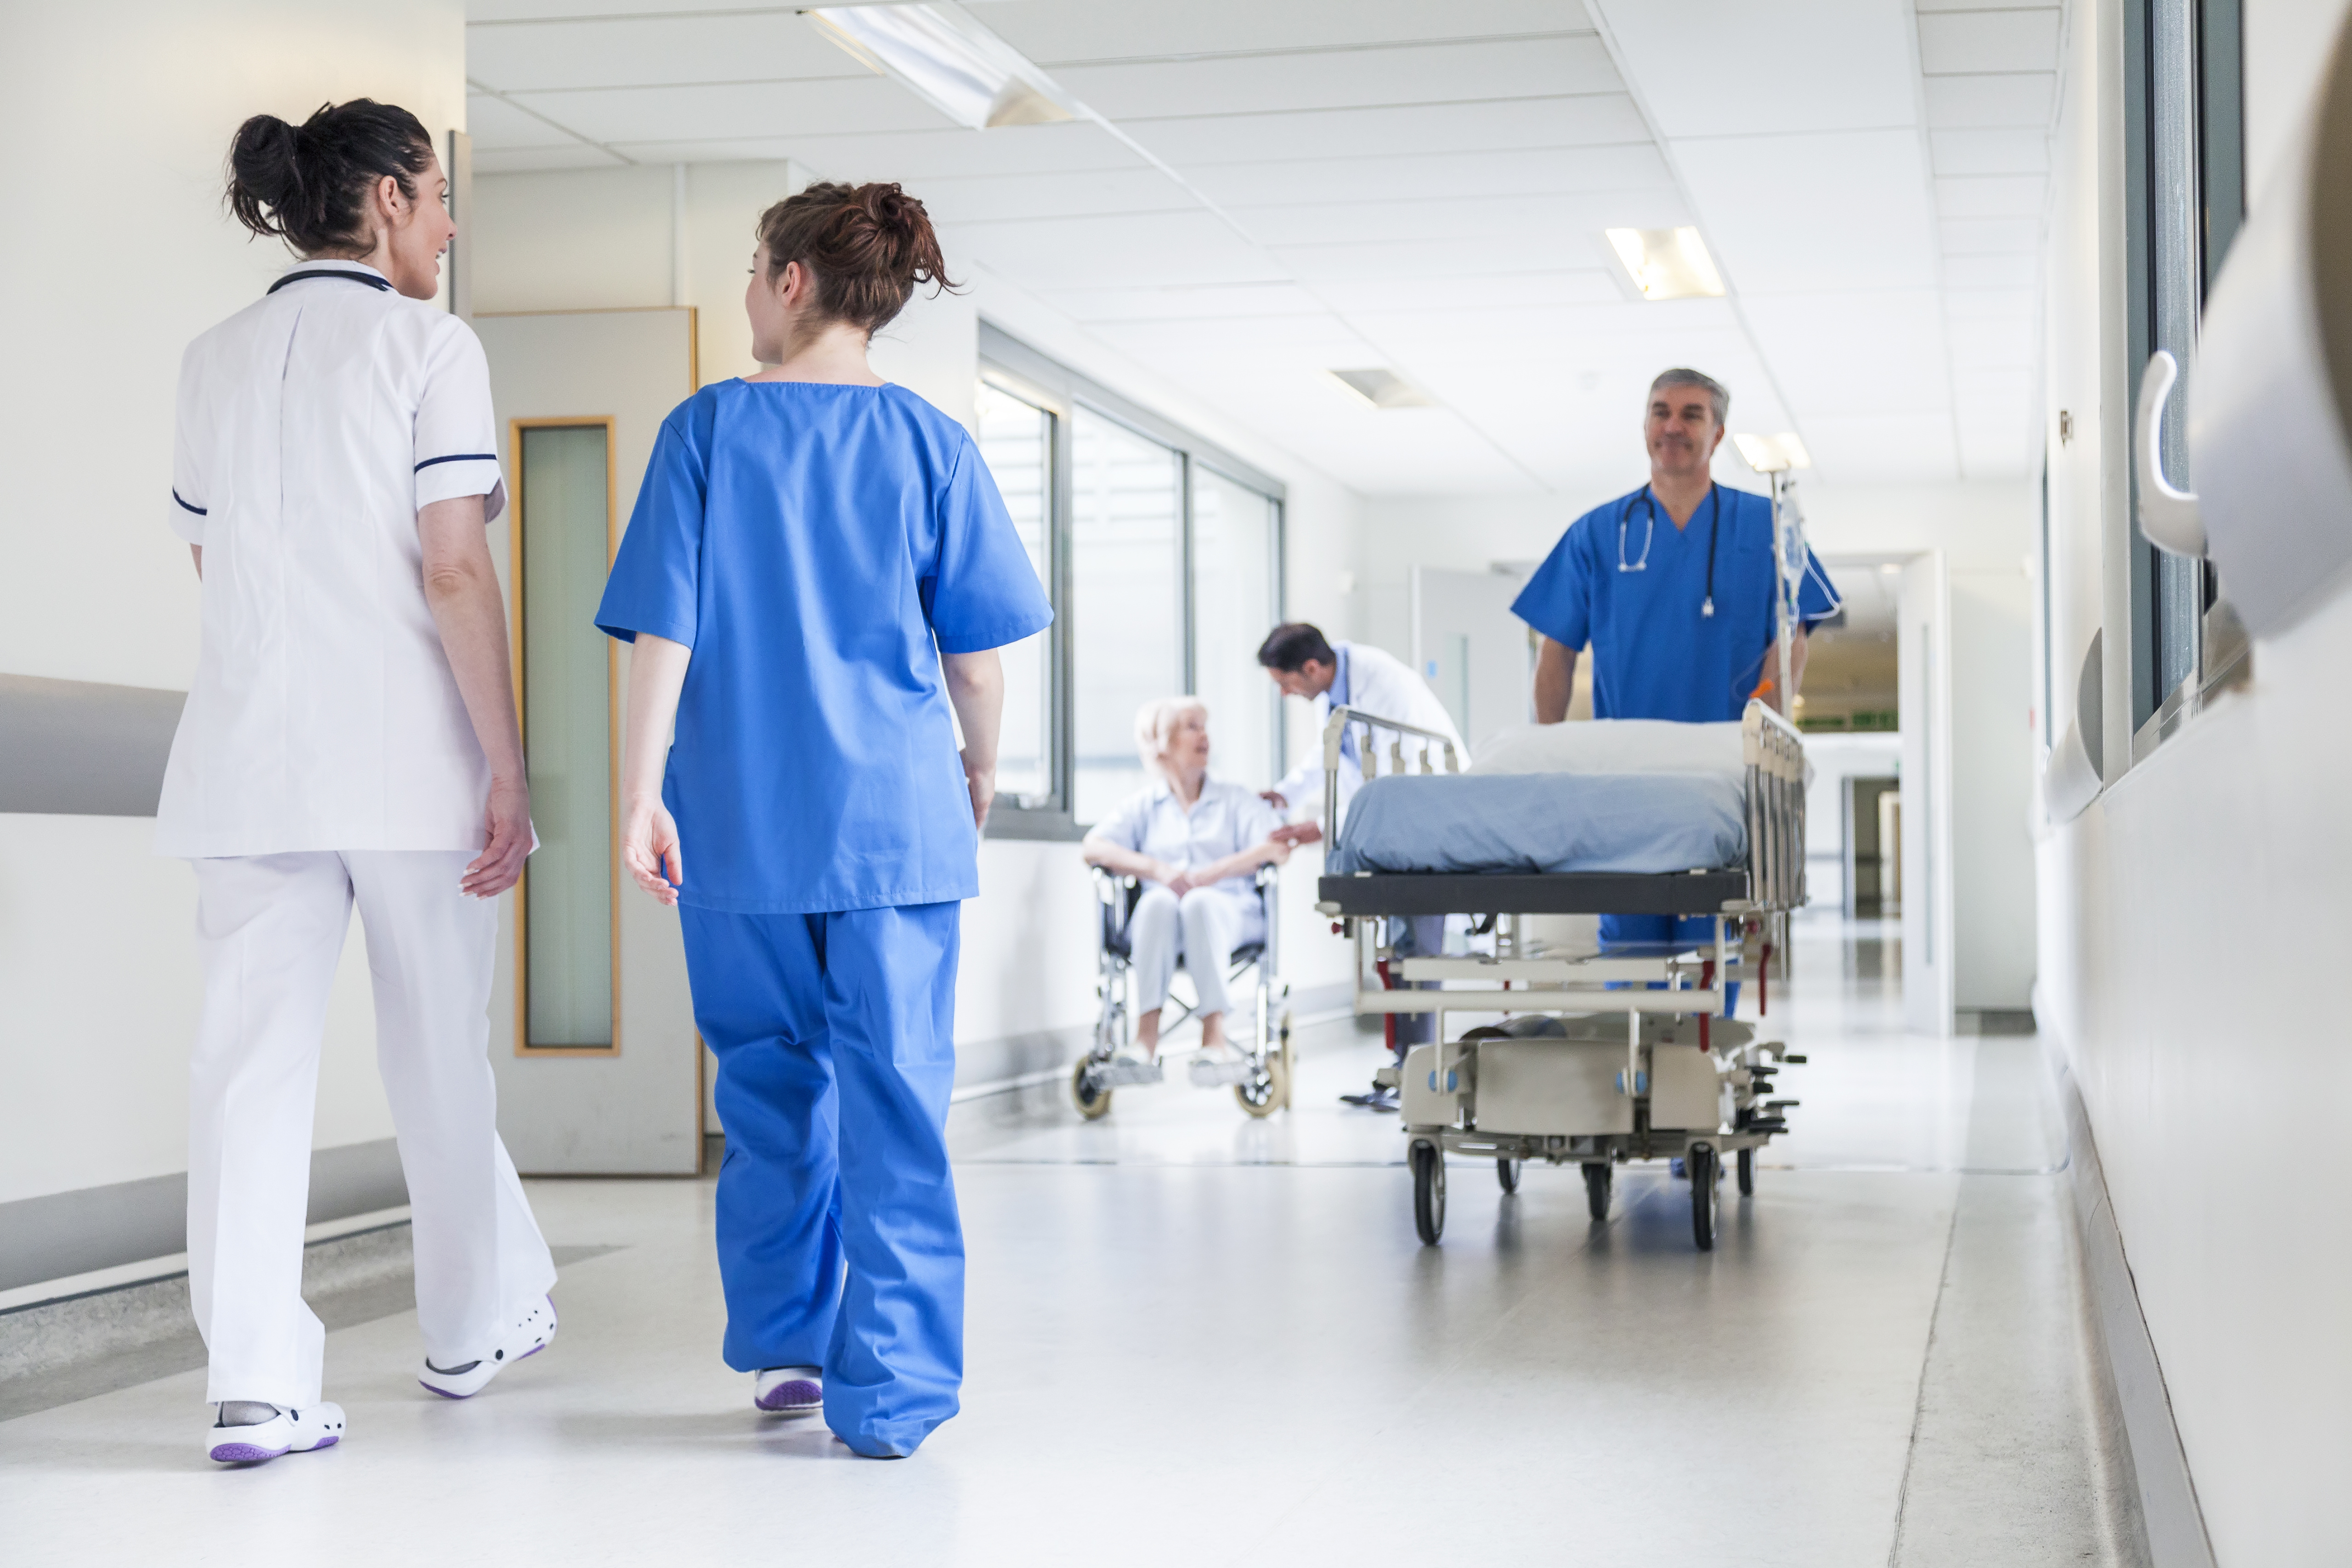 The Top 5 Reasons for Hospital Readmission